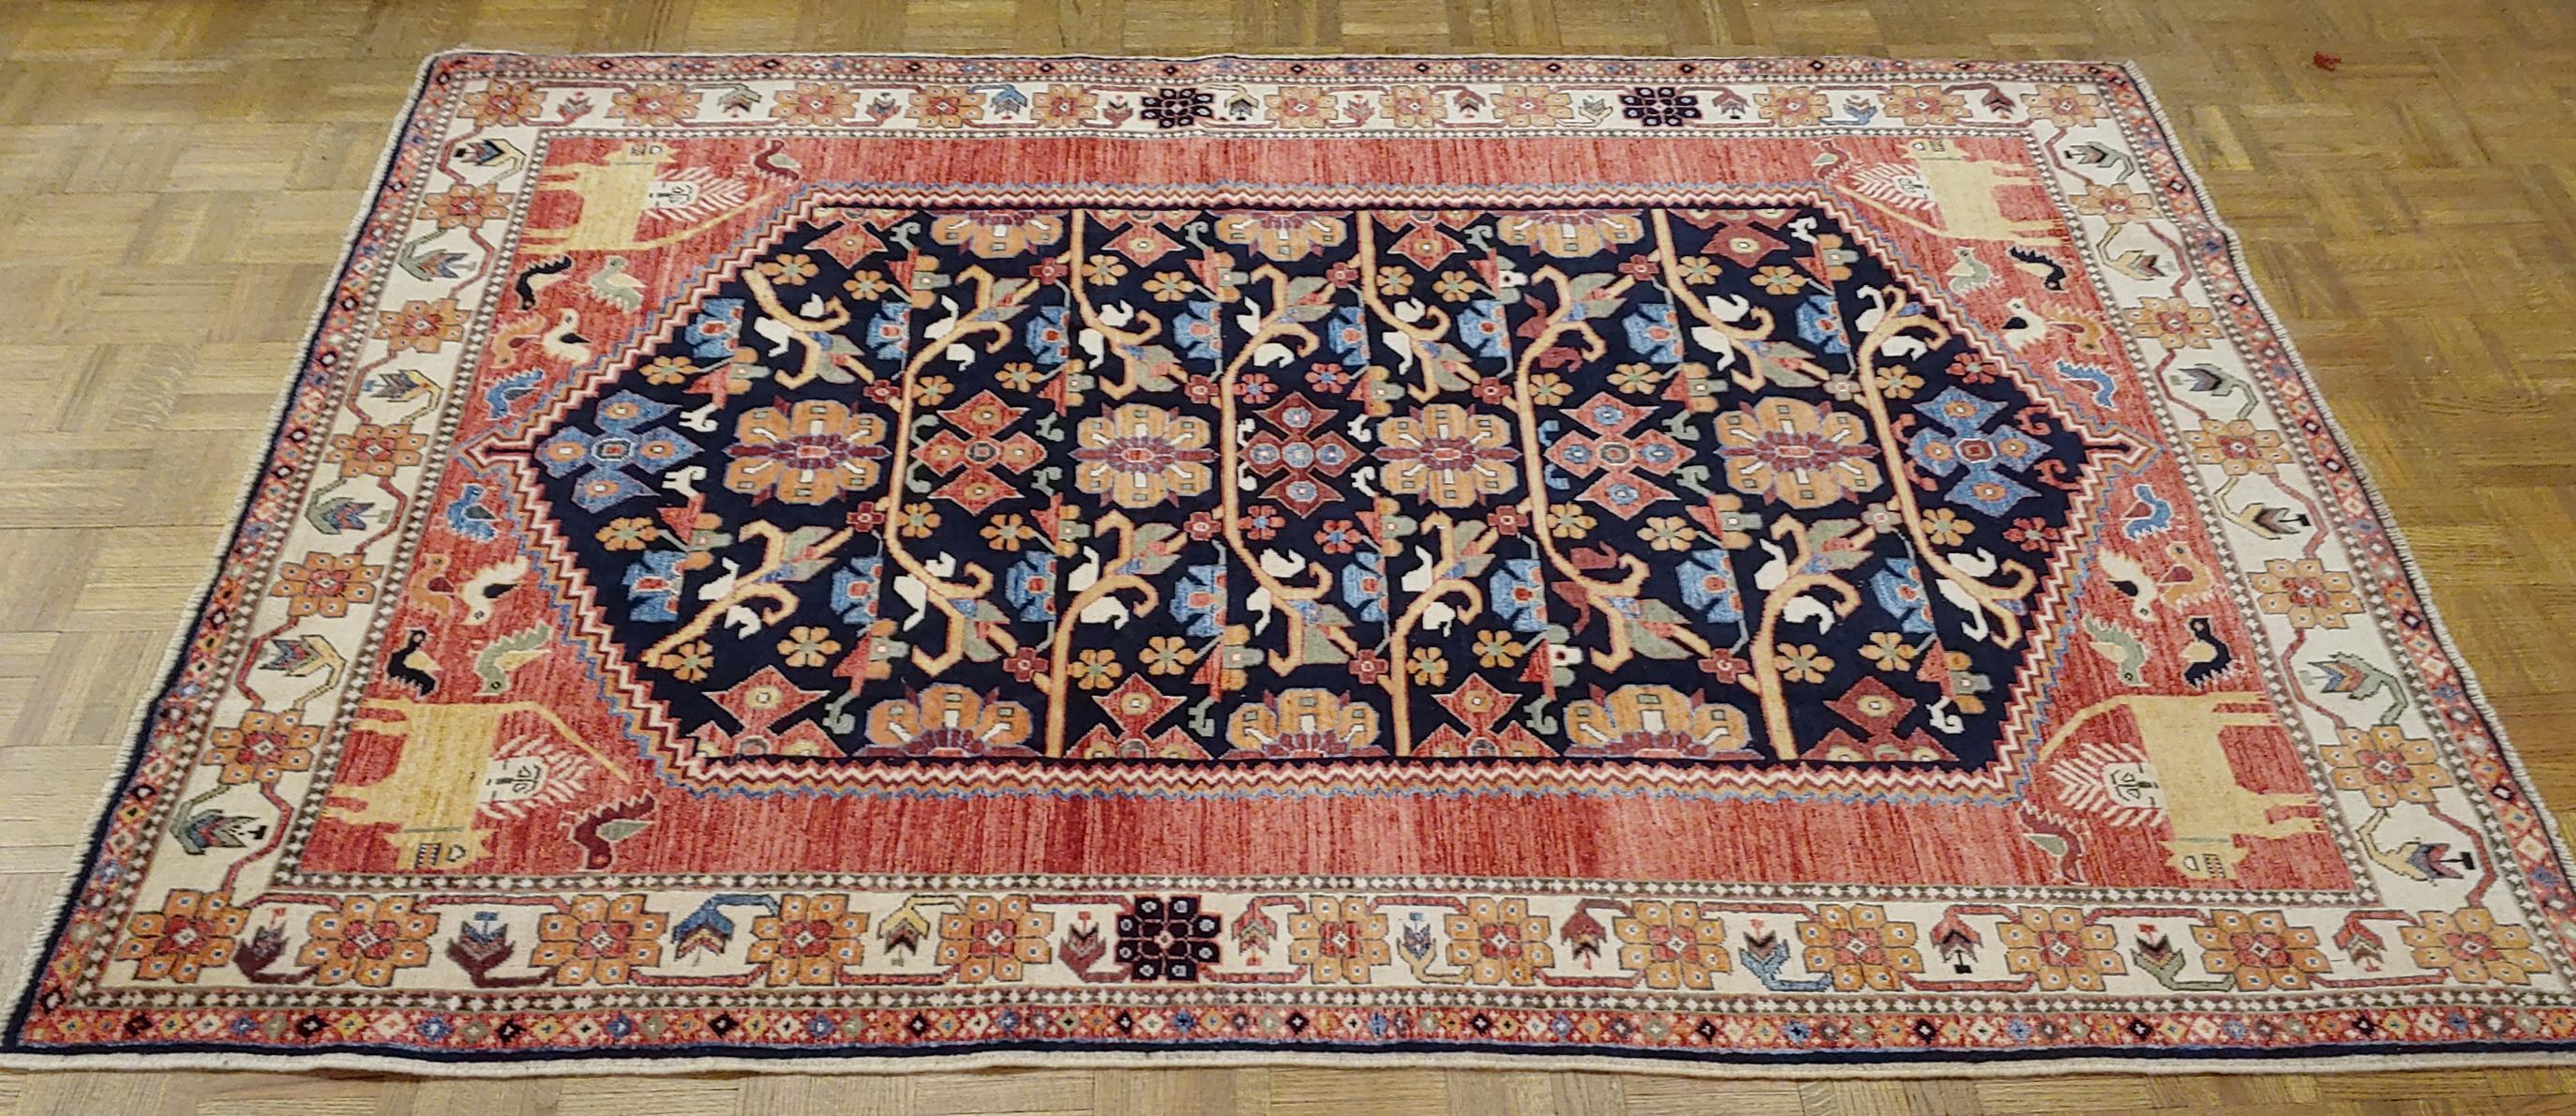 This is one of the best new rugs we offer. Handwoven in Afghanistan, these rugs offer a superior hand-spun Afghanistan wool with a striking medley of wonderful, all natural dyes. The designer borrows motif elements from Classic Antique Persian and